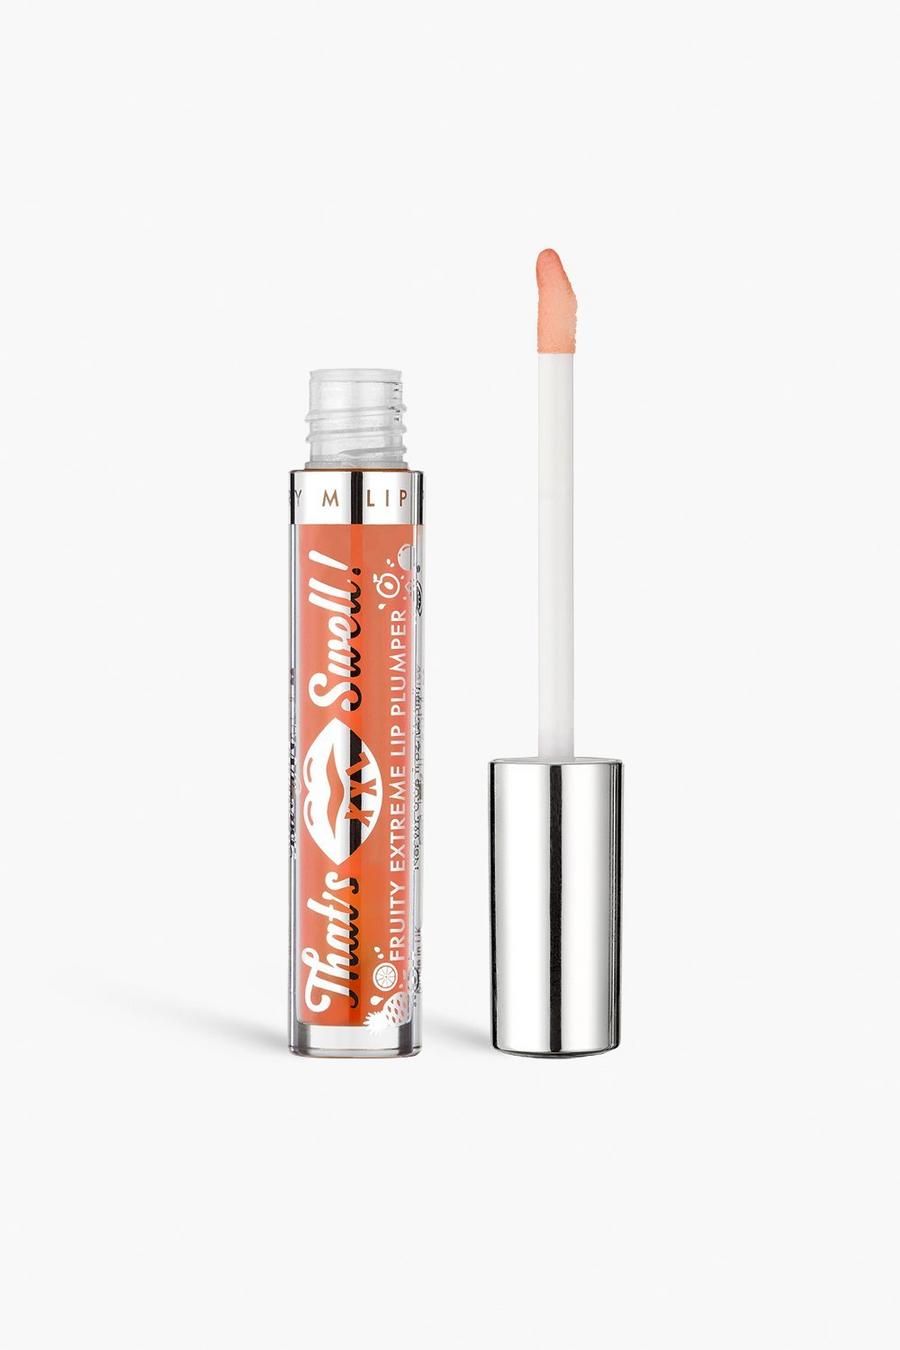 Orange Barry M That's Swell! Fruity Extreme Lip Plumper